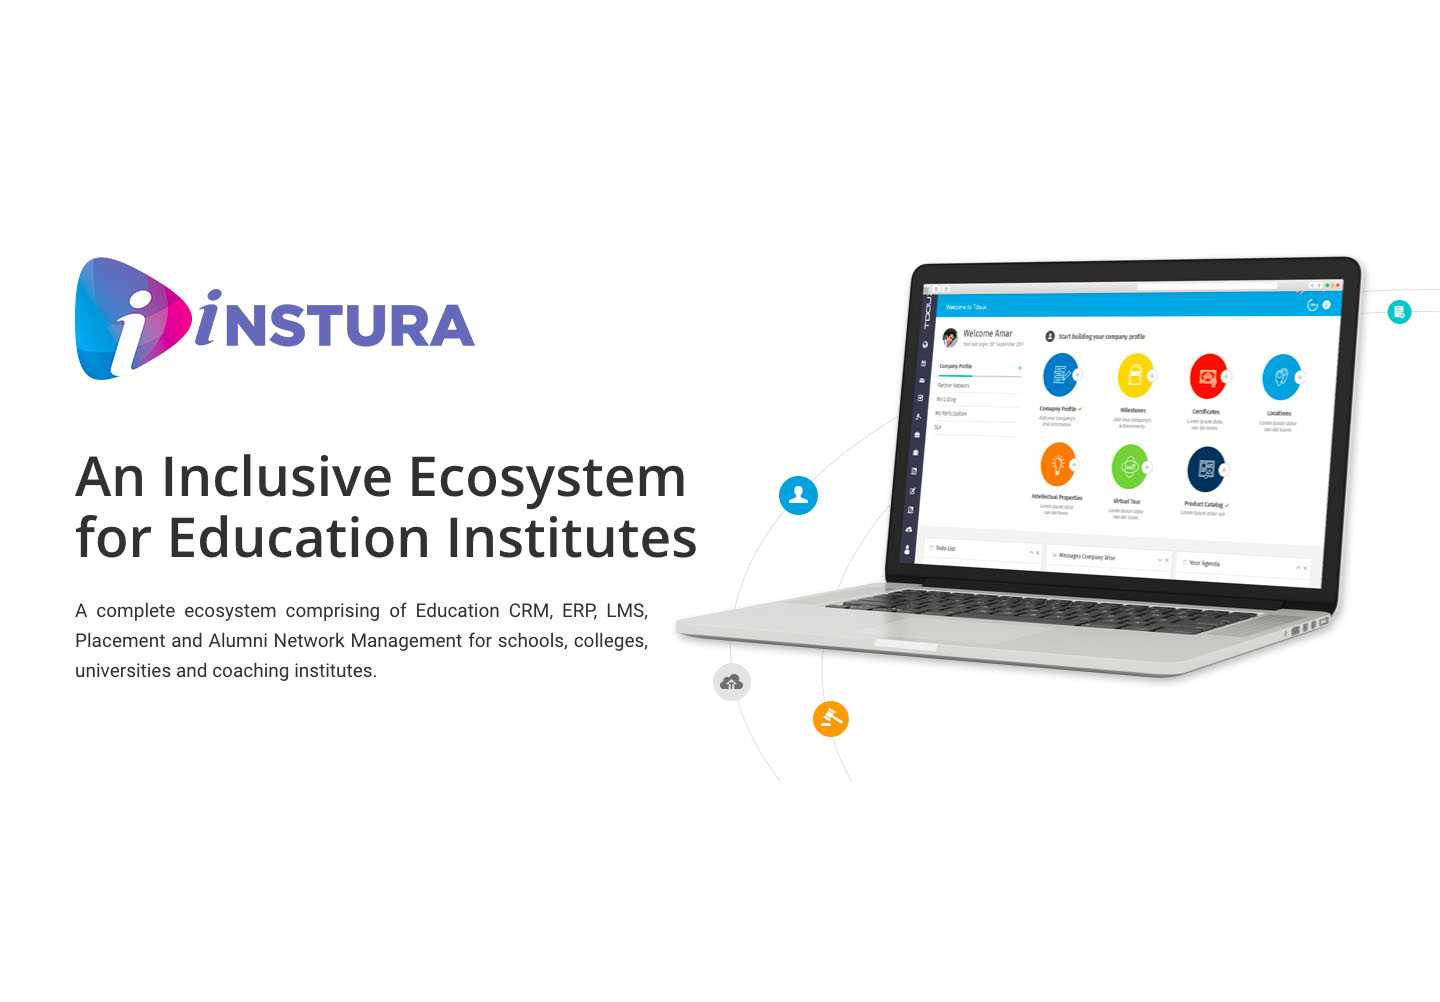 INSTURA - An Inclusive Ecosystem For Education Institutes